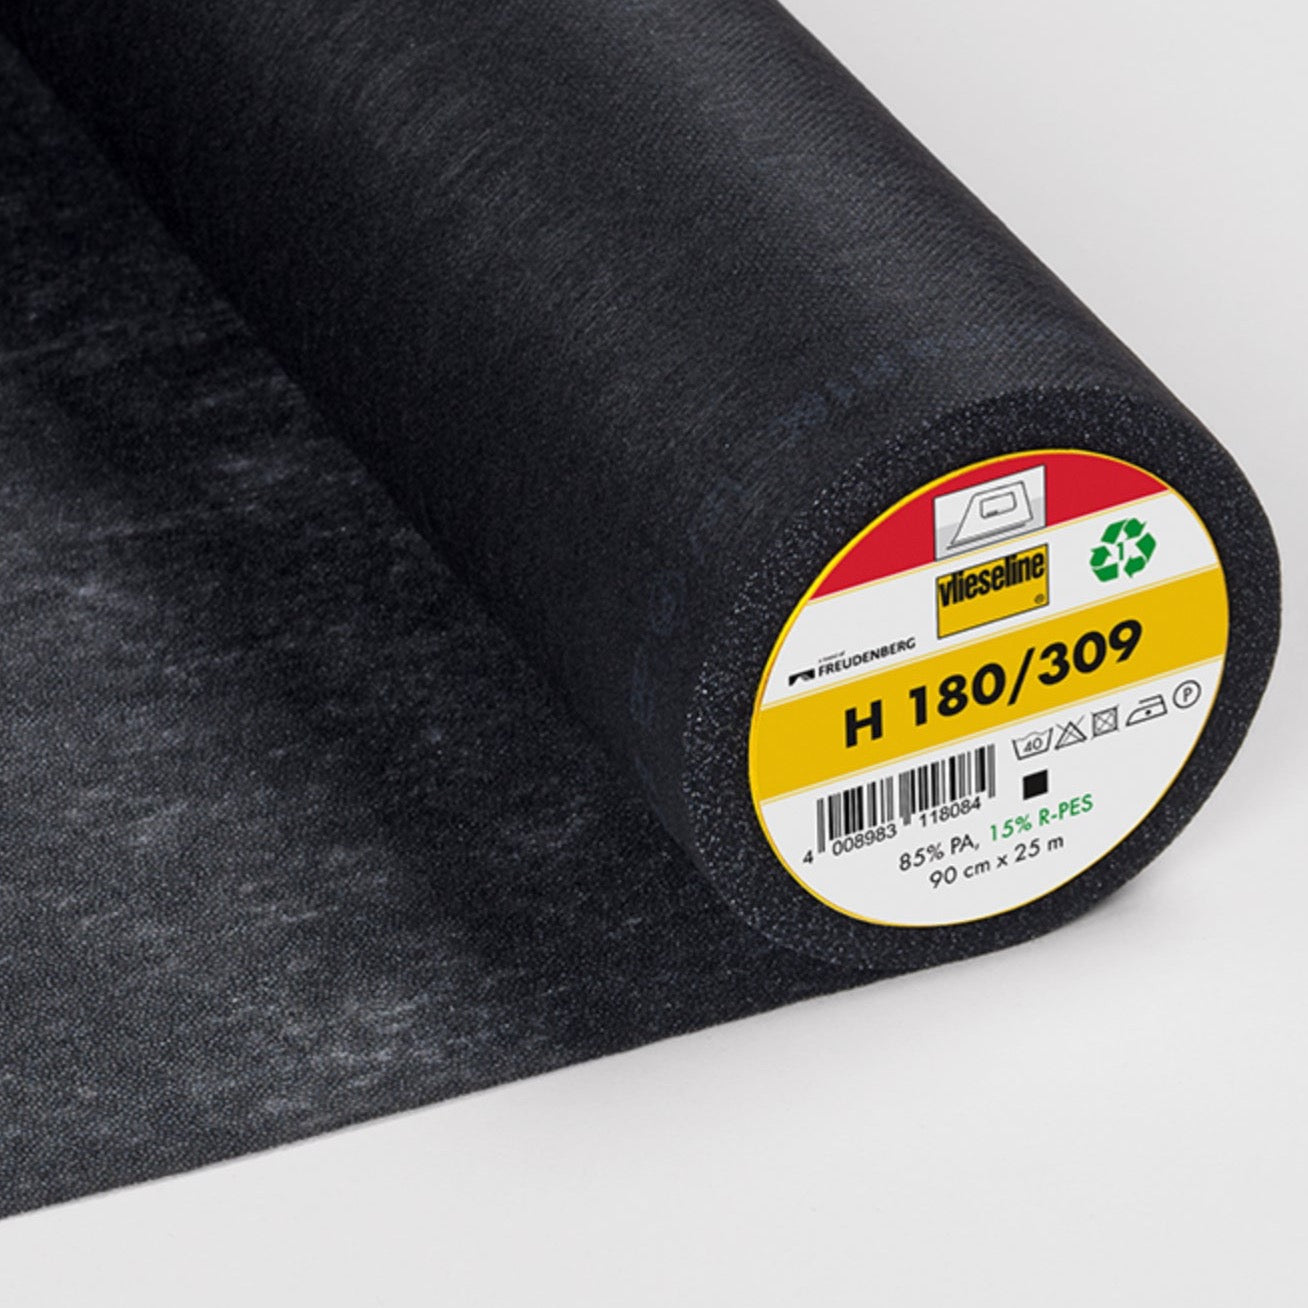 Fusible Lightweight H 180 Interfacing Recycled in Black - Sold in Half Meters